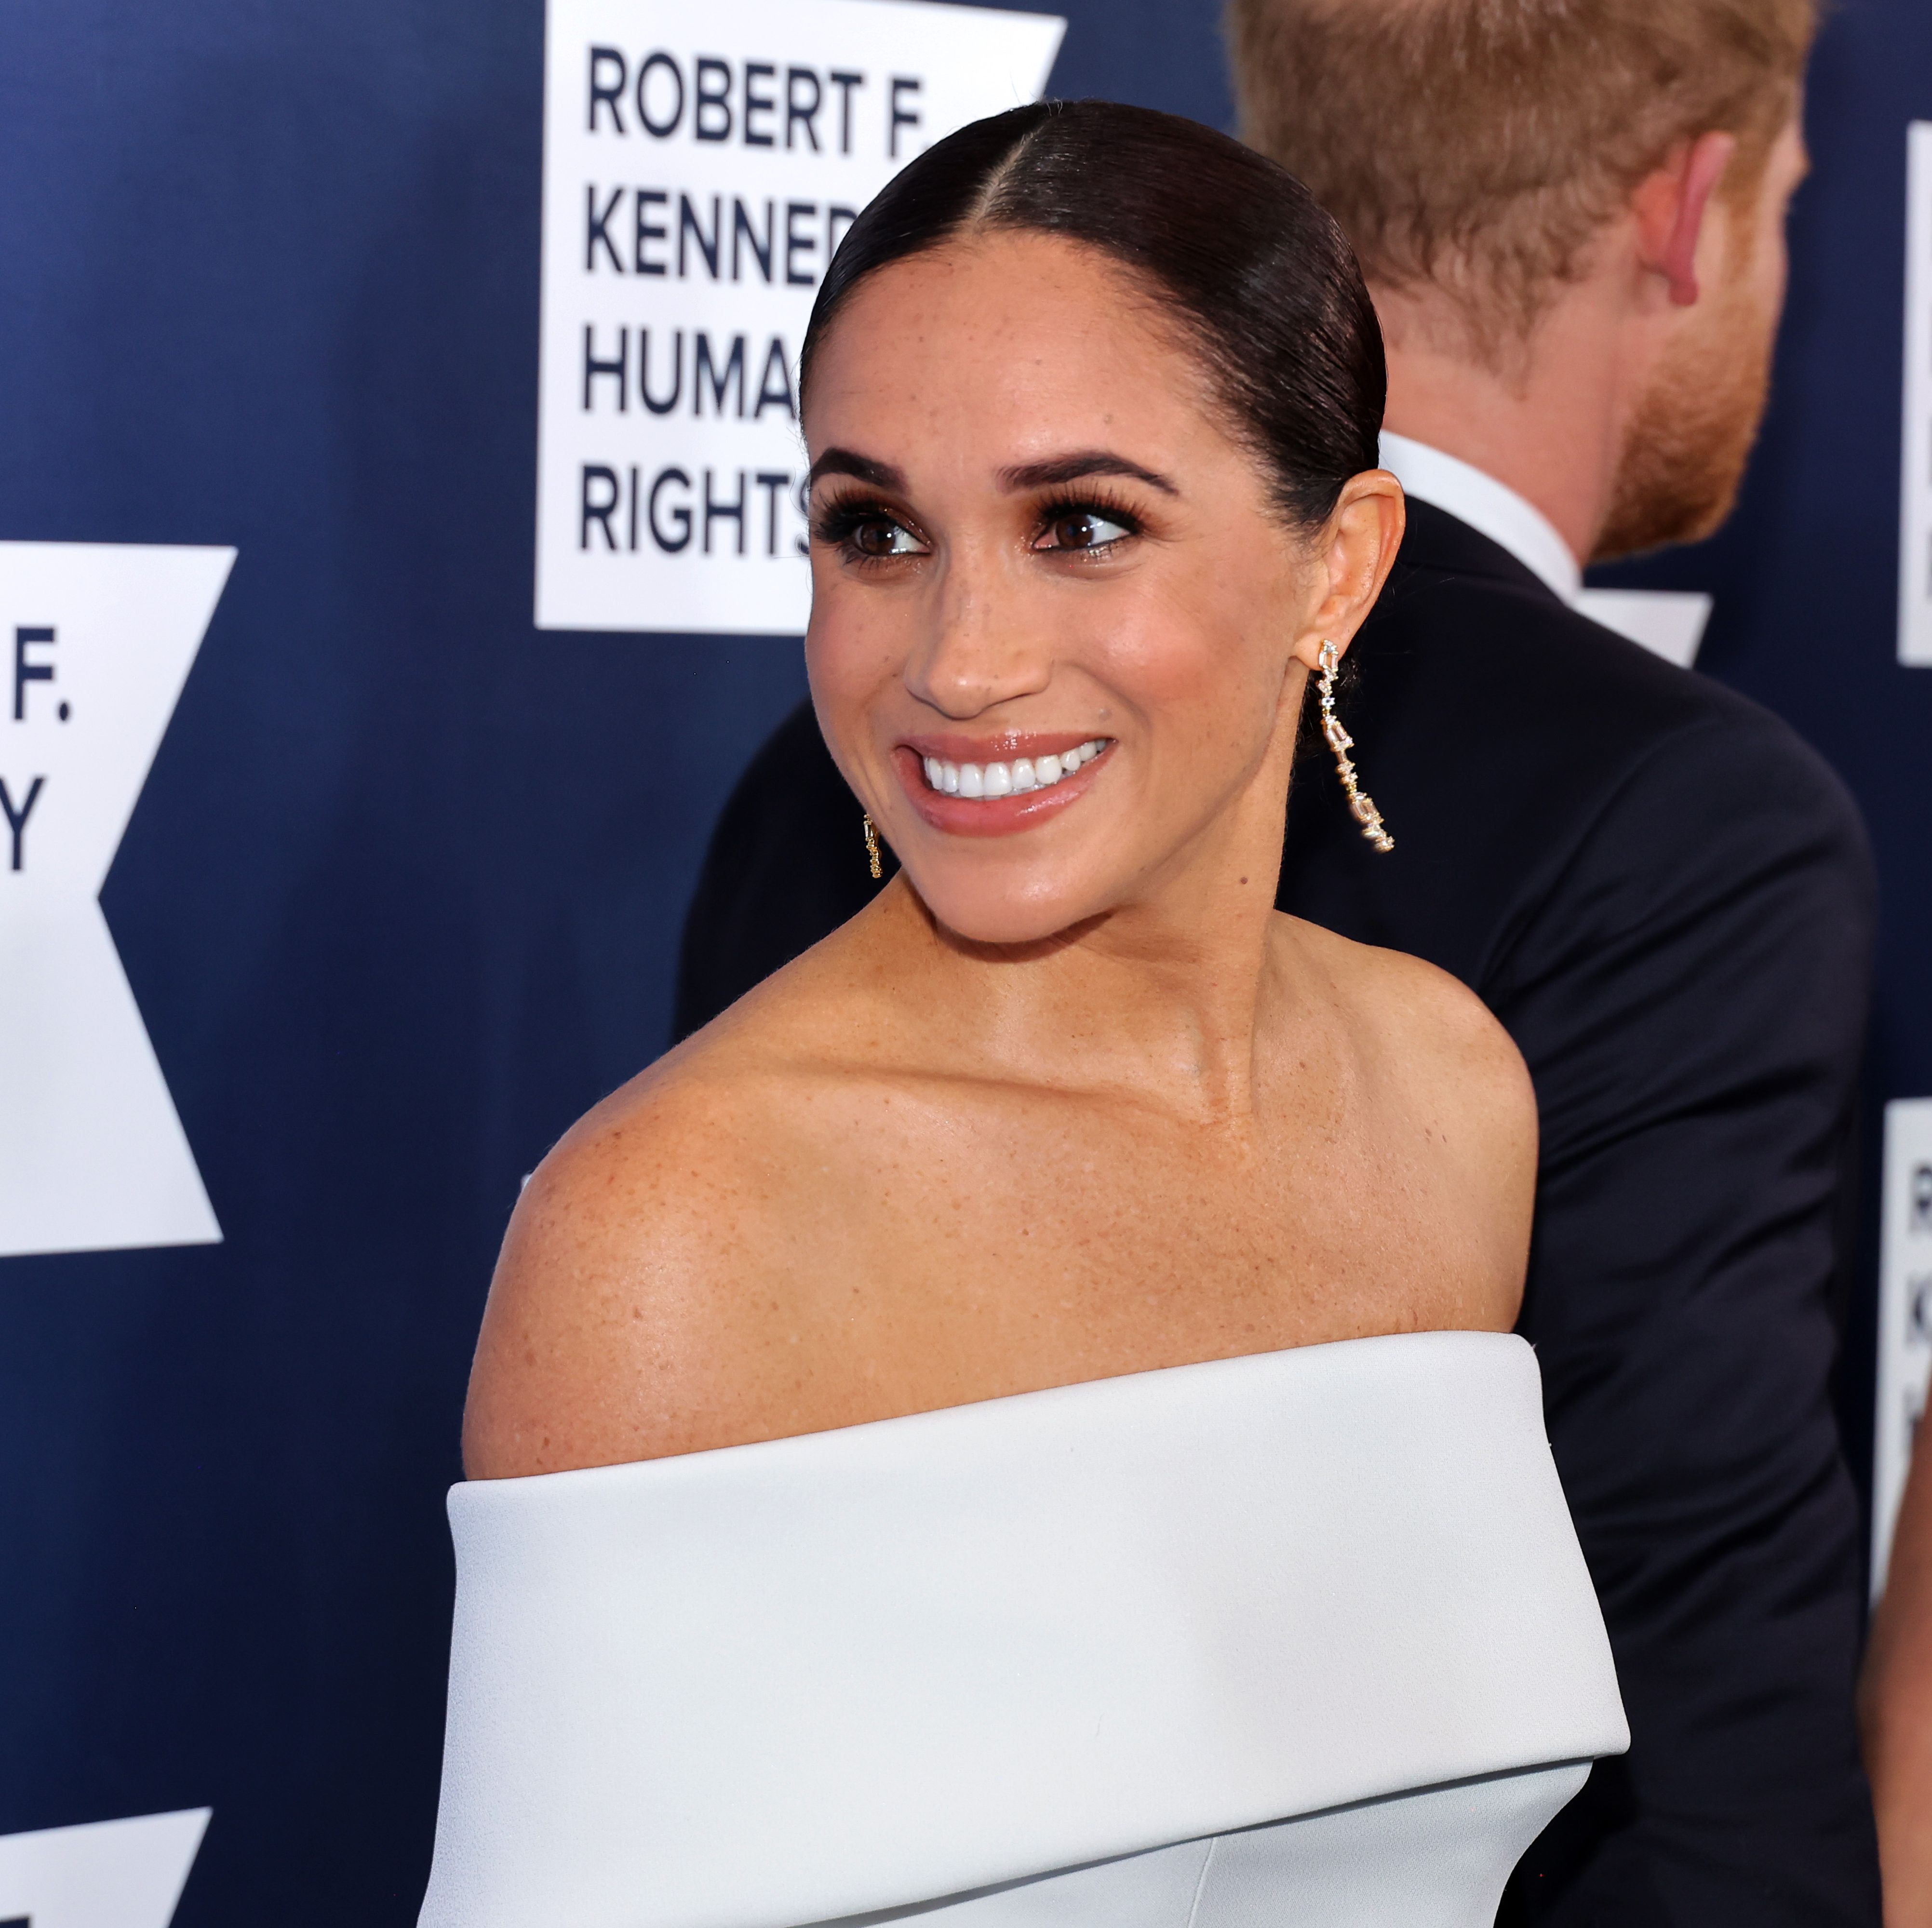 Her friend gushed about what a wonderful mom the Duchess of Sussex is.